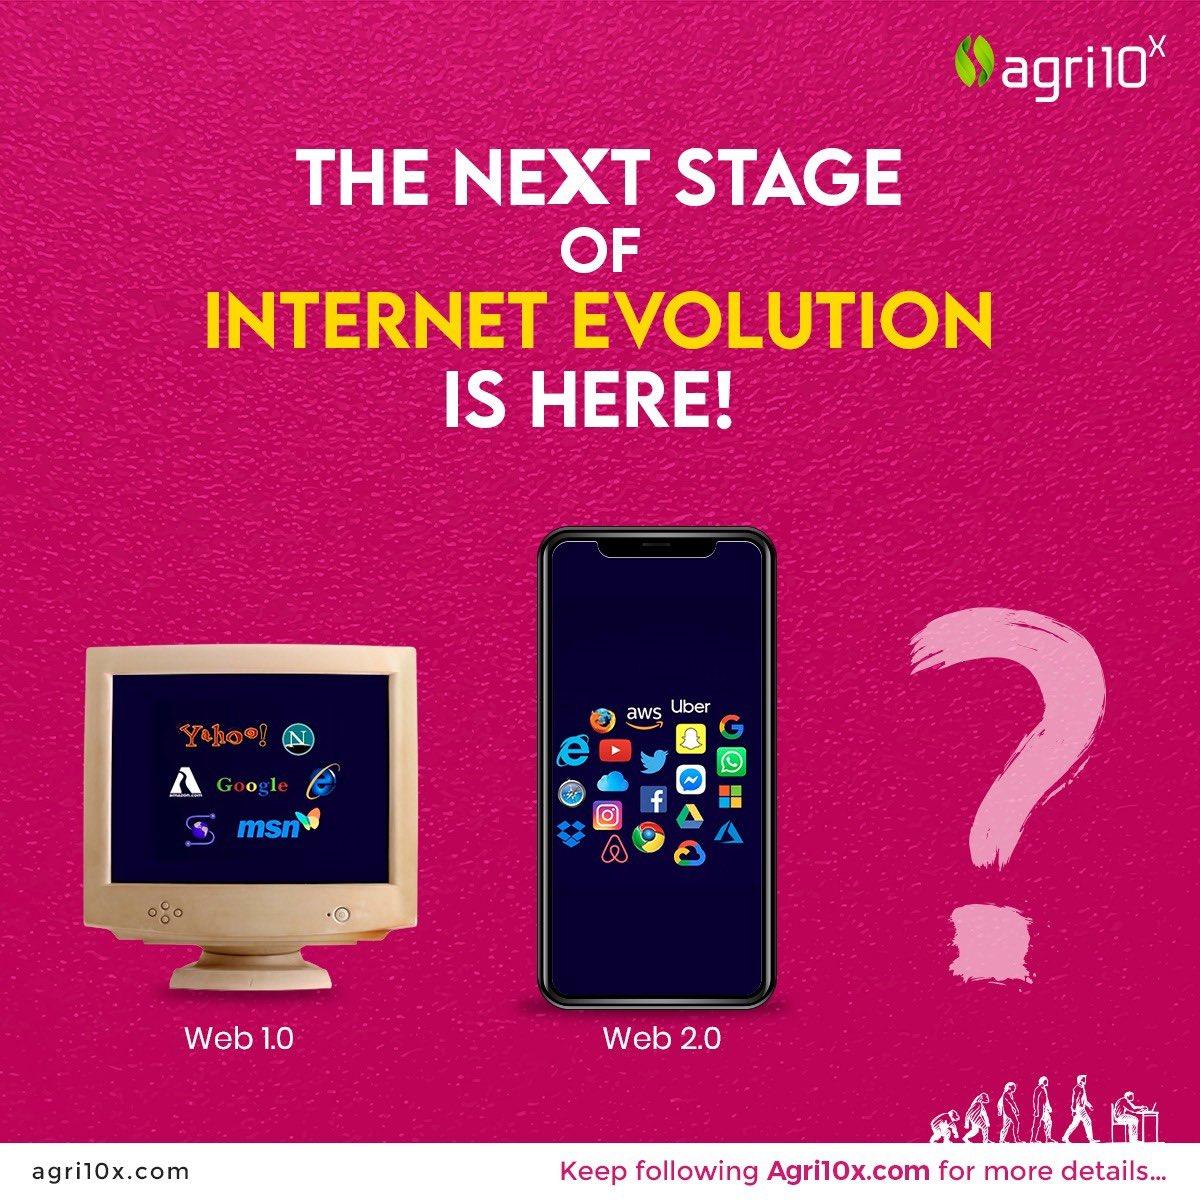 We all have witnessed the wonders of web evolution! Now it’s time to witness the next stage. Keep following Agri10x.com for more details. #Agri10x #Agritech #Evolution #Web #Future